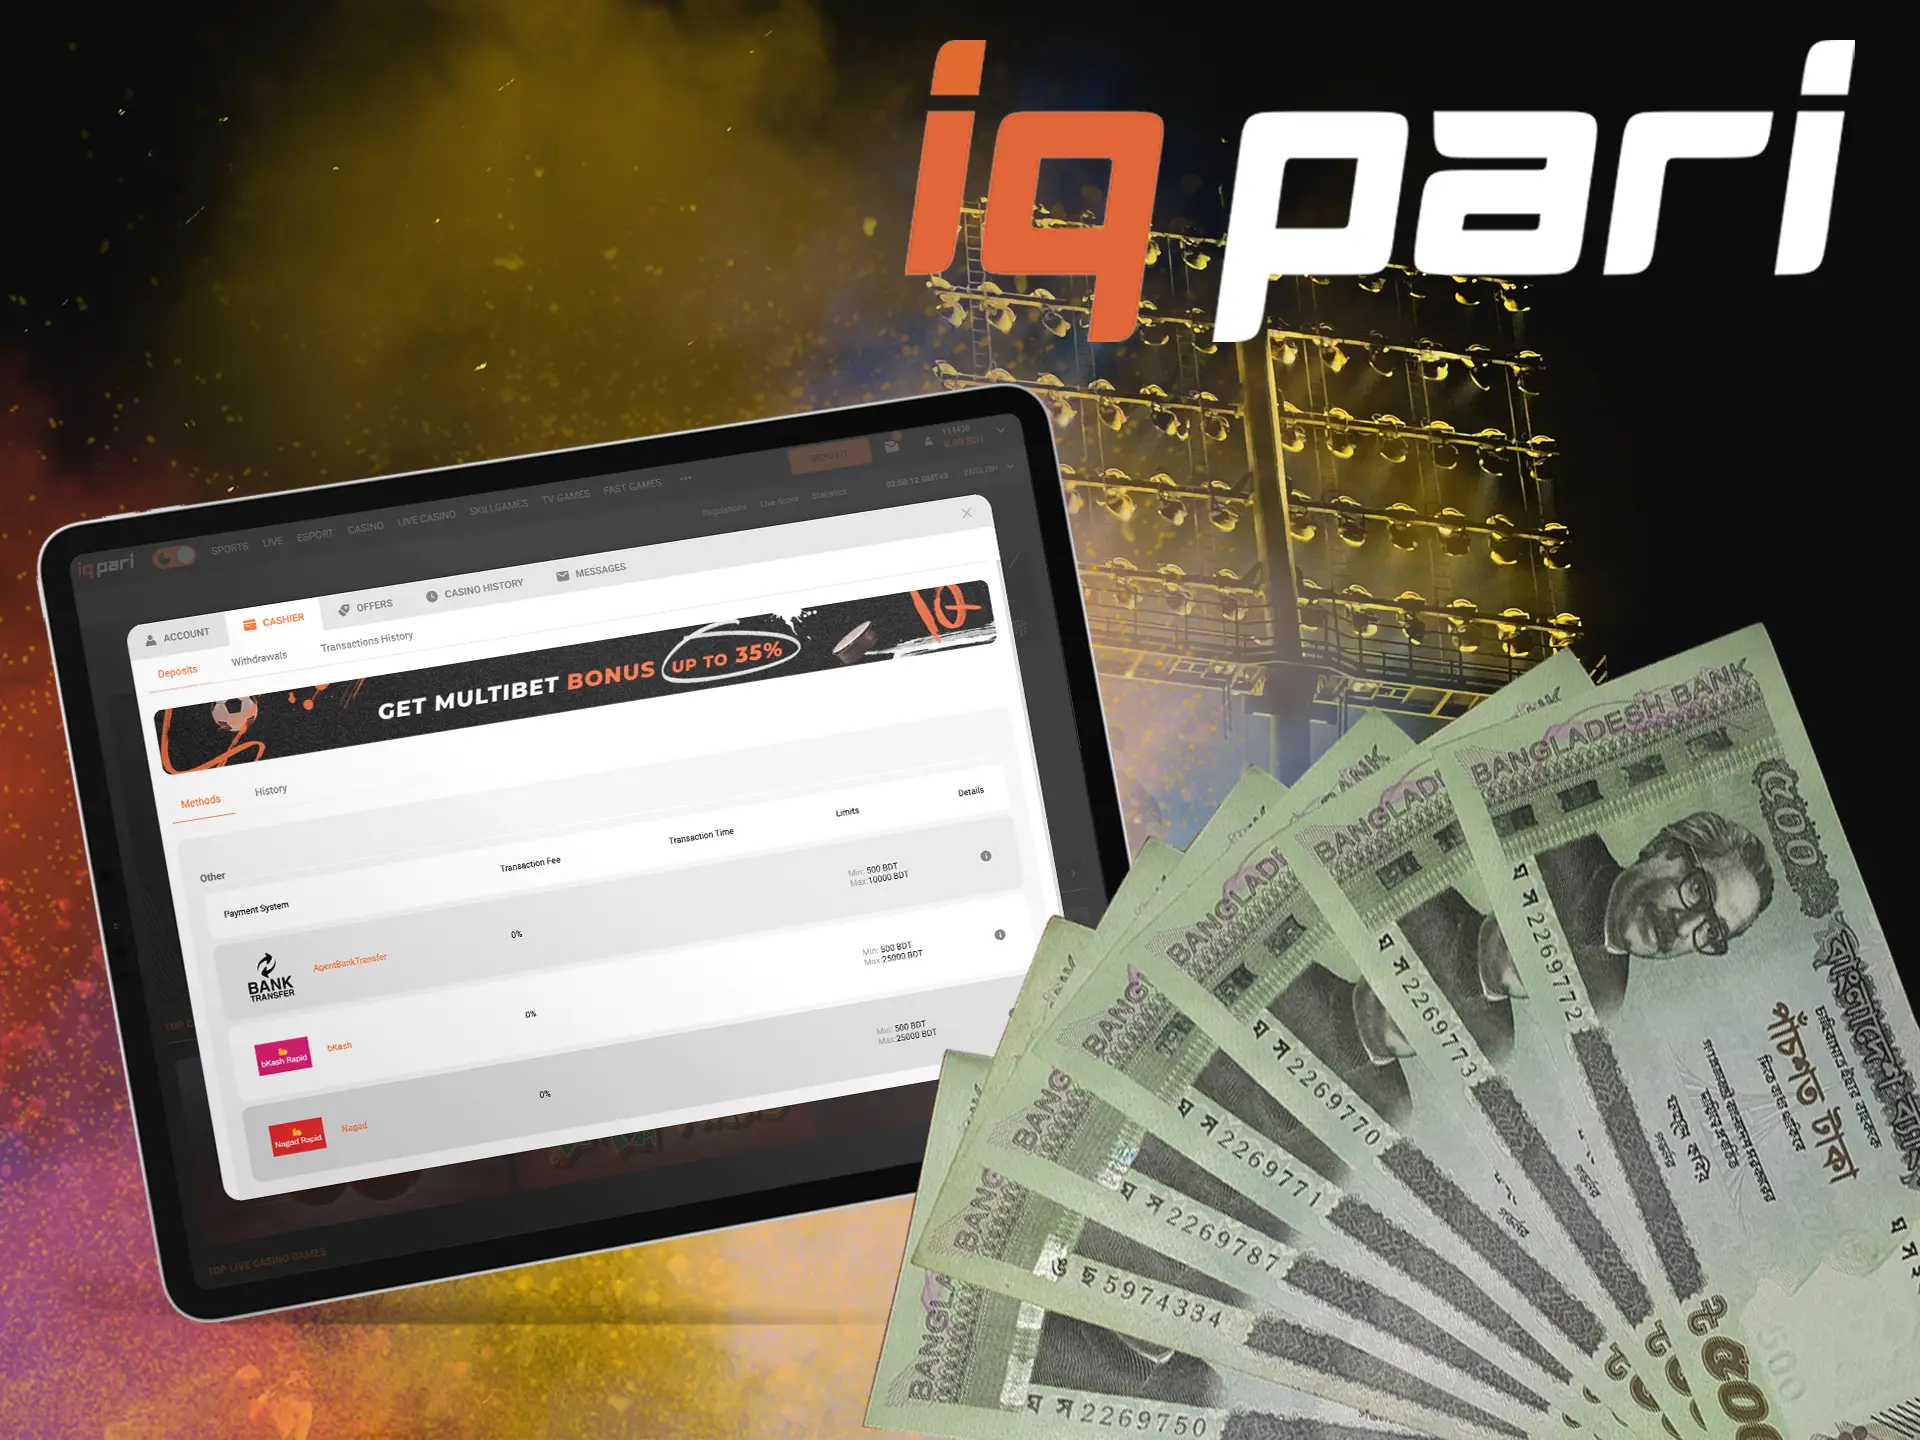 Our simple guide will help players from Bangladesh to fund money to their accounts and start betting in IQPari.